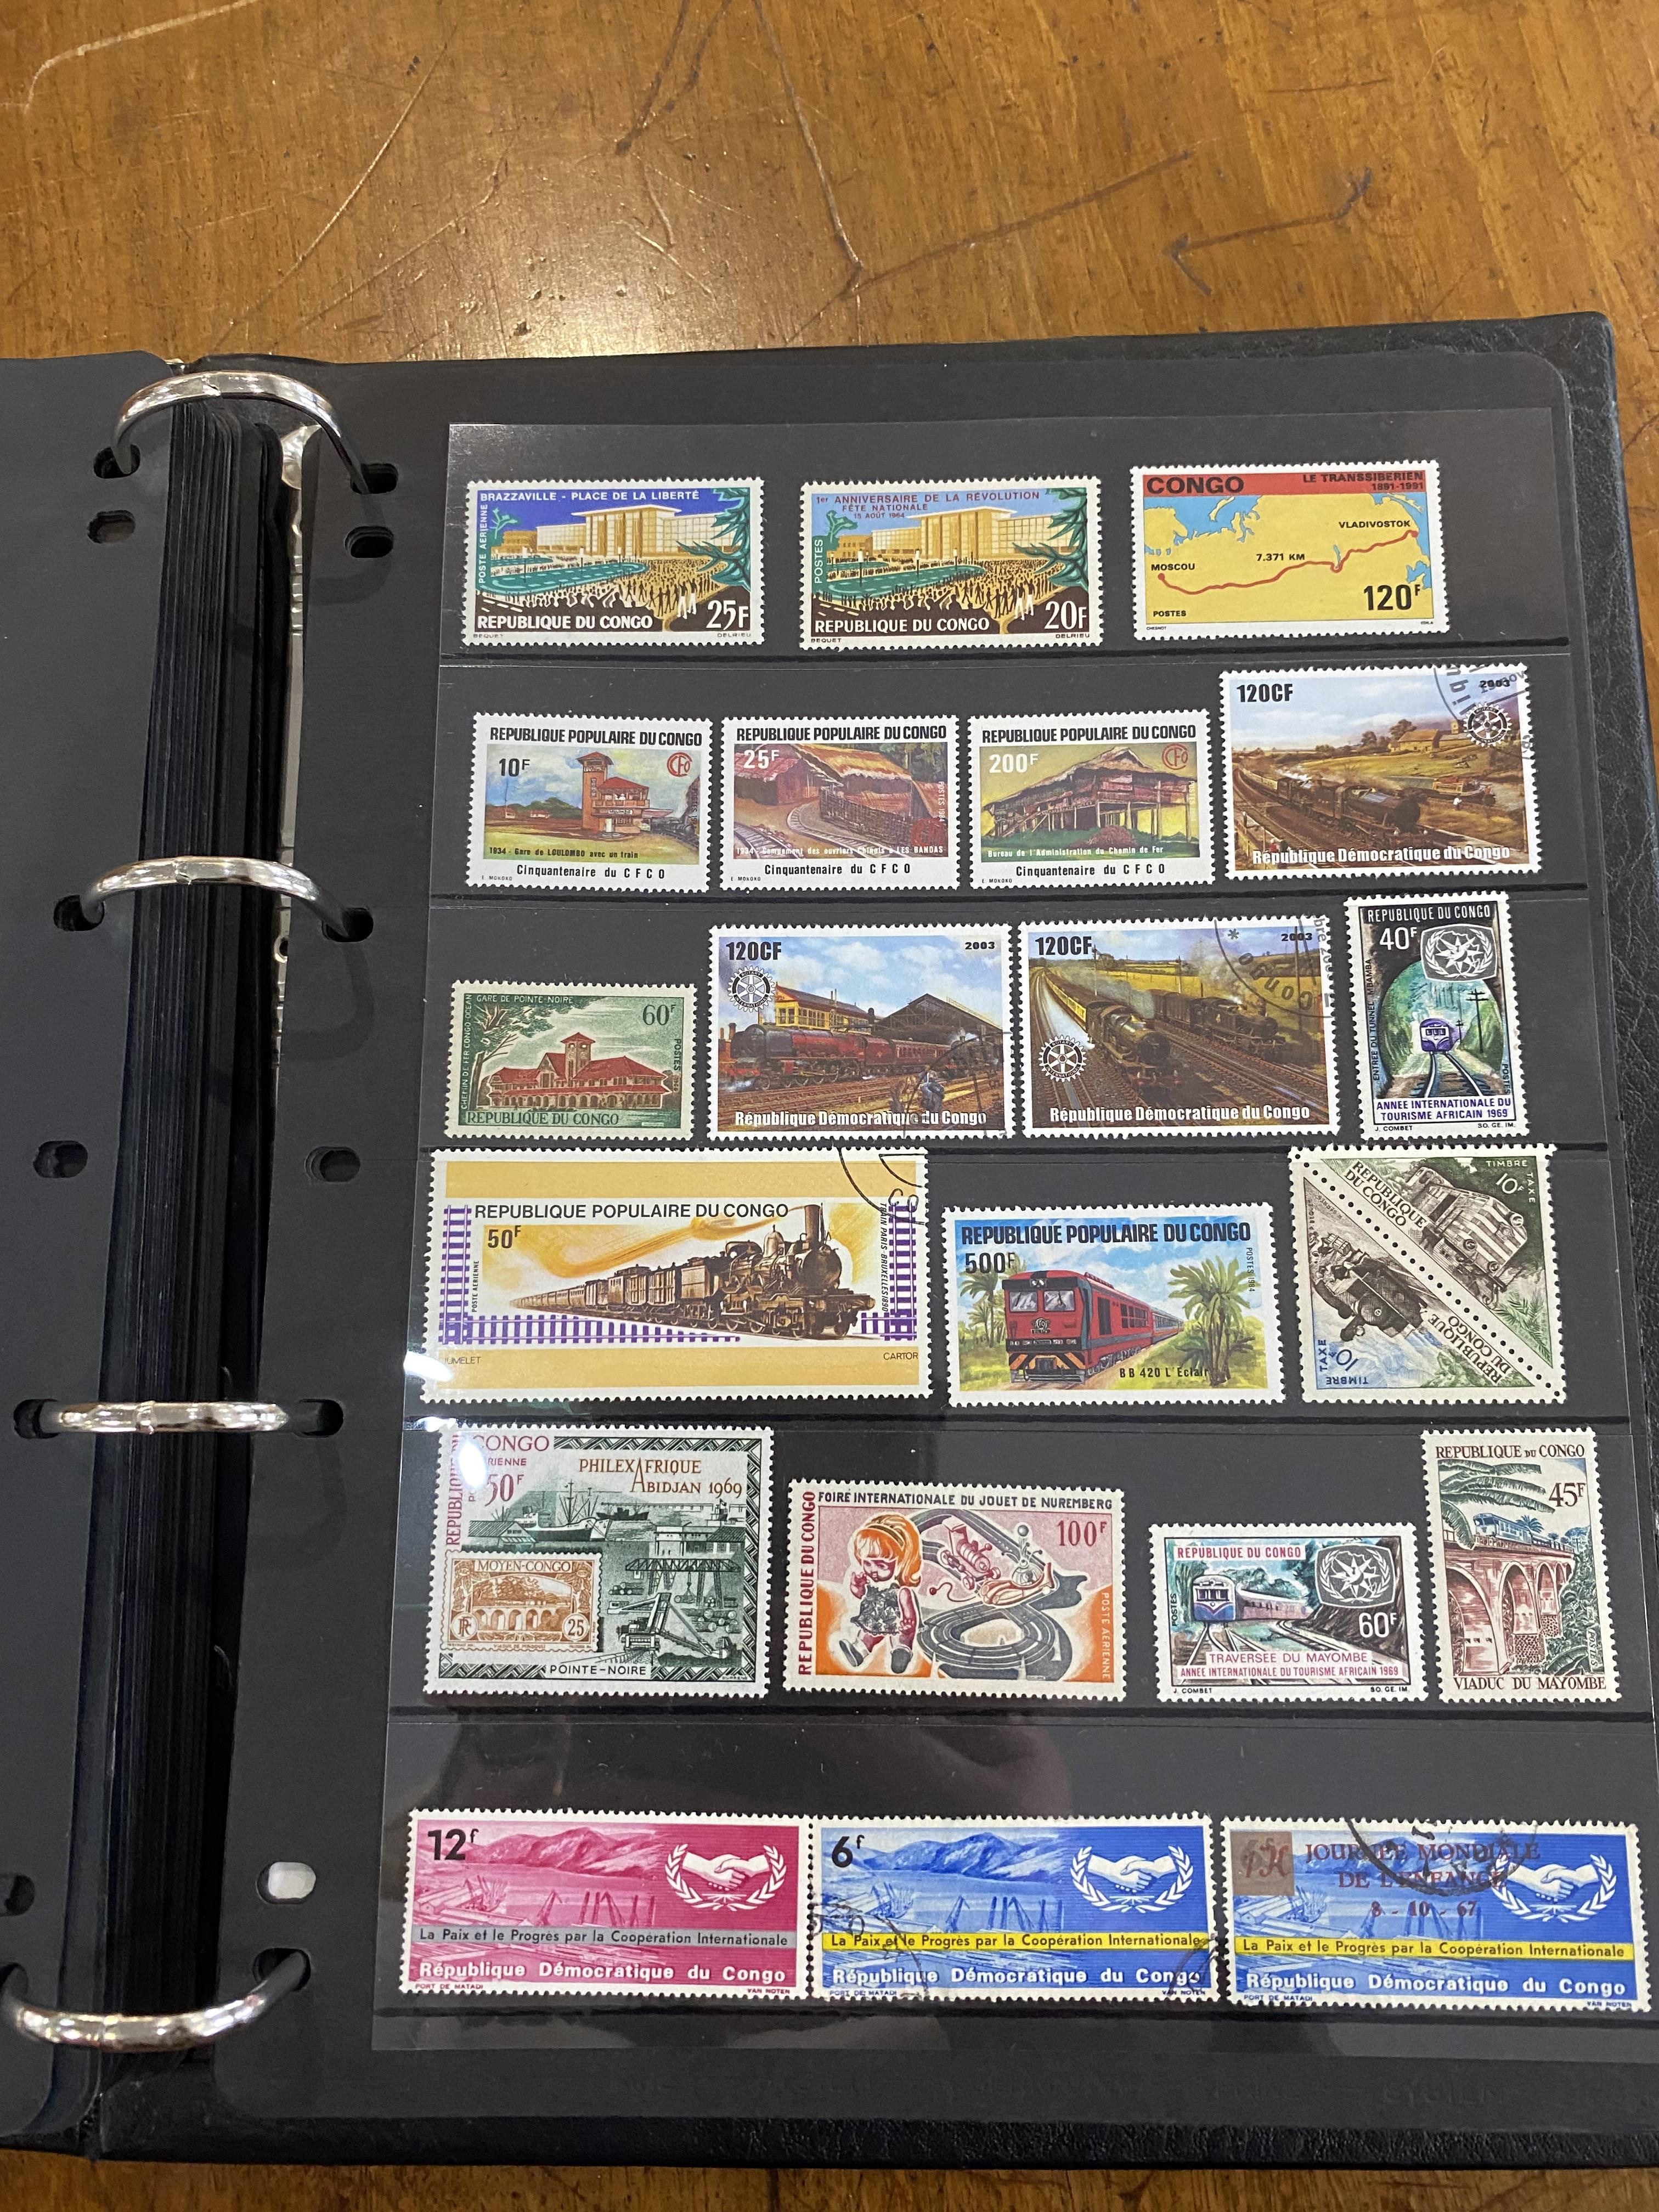 Stamp Interest - Meaty Album of Mostly Mint and railway oriented stamps from around the world. - Image 5 of 8